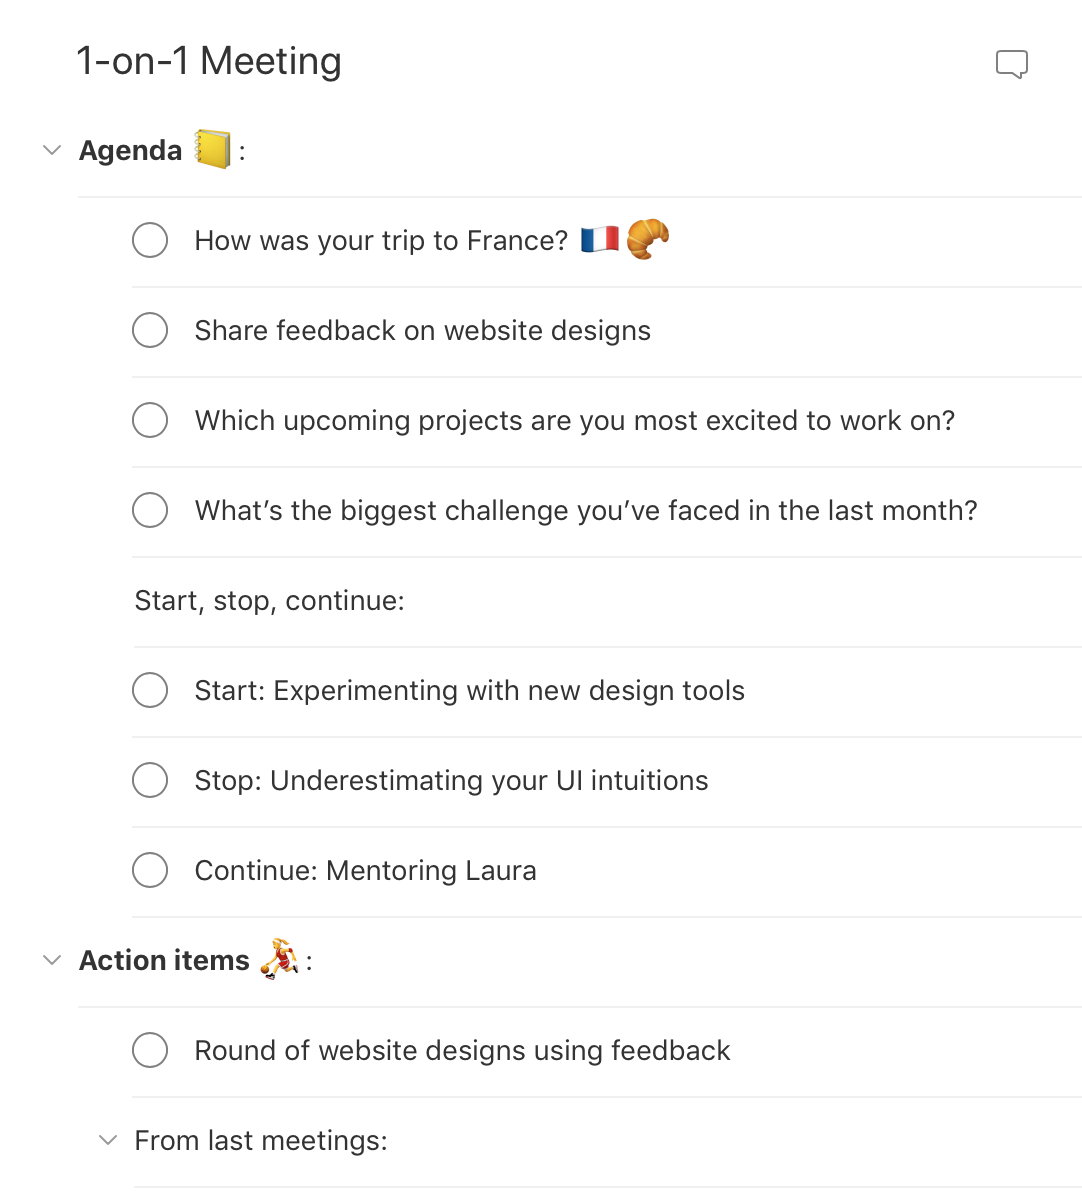 23-on-23 Meeting - Templates  Todoist Pertaining To One On One Meetings Template